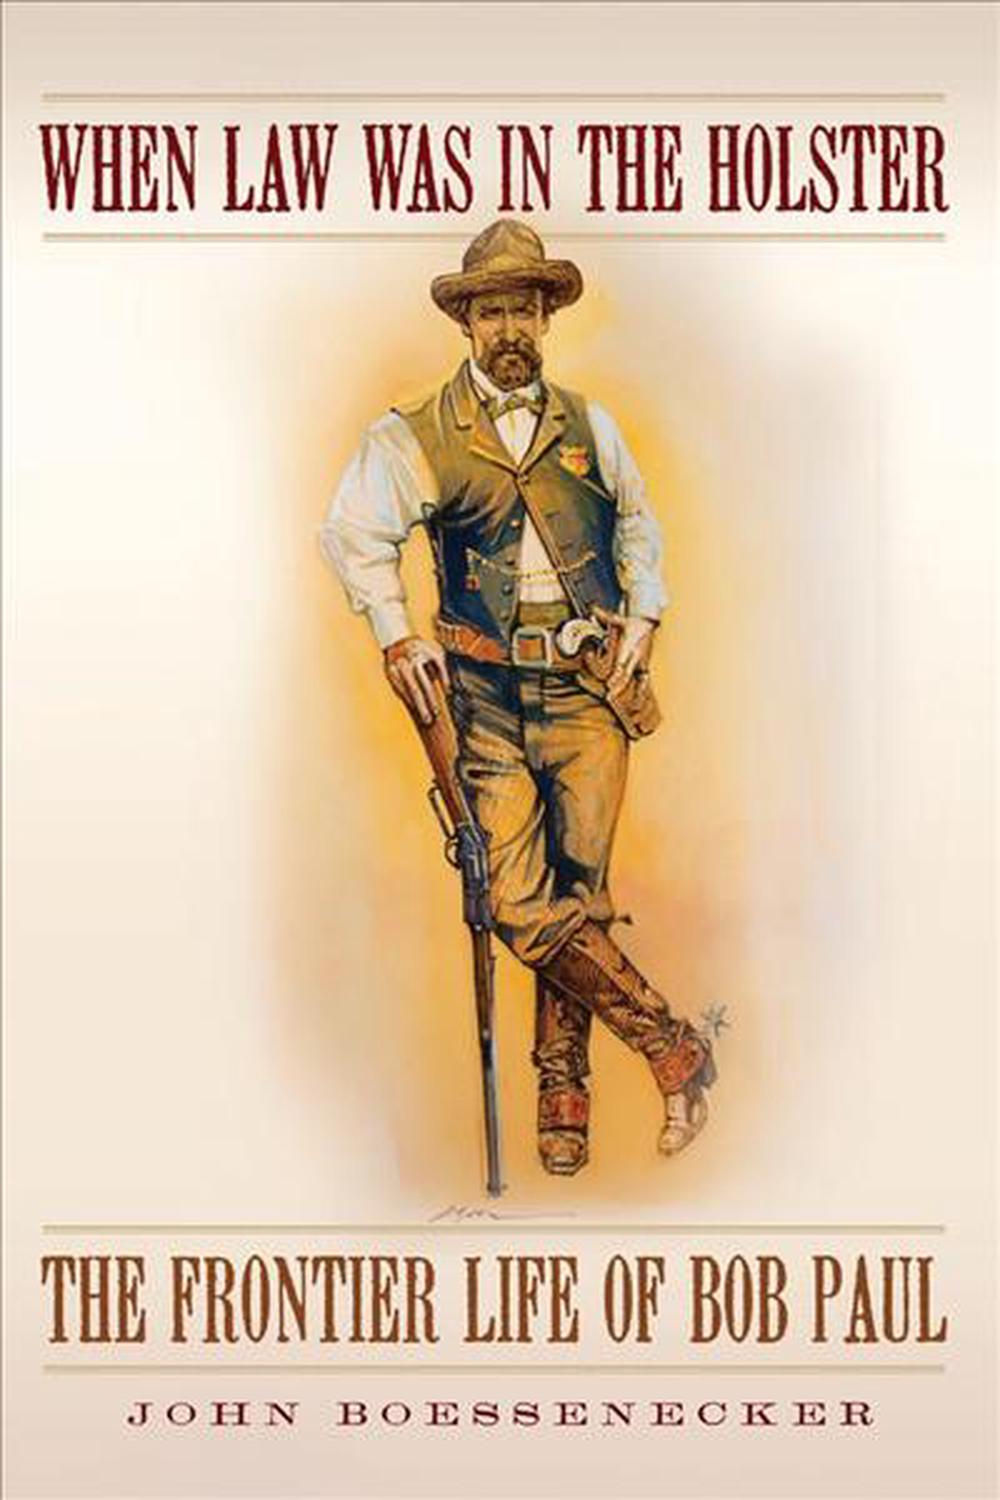 When Law Was in the Holster The Frontier Life of Bob Paul by John